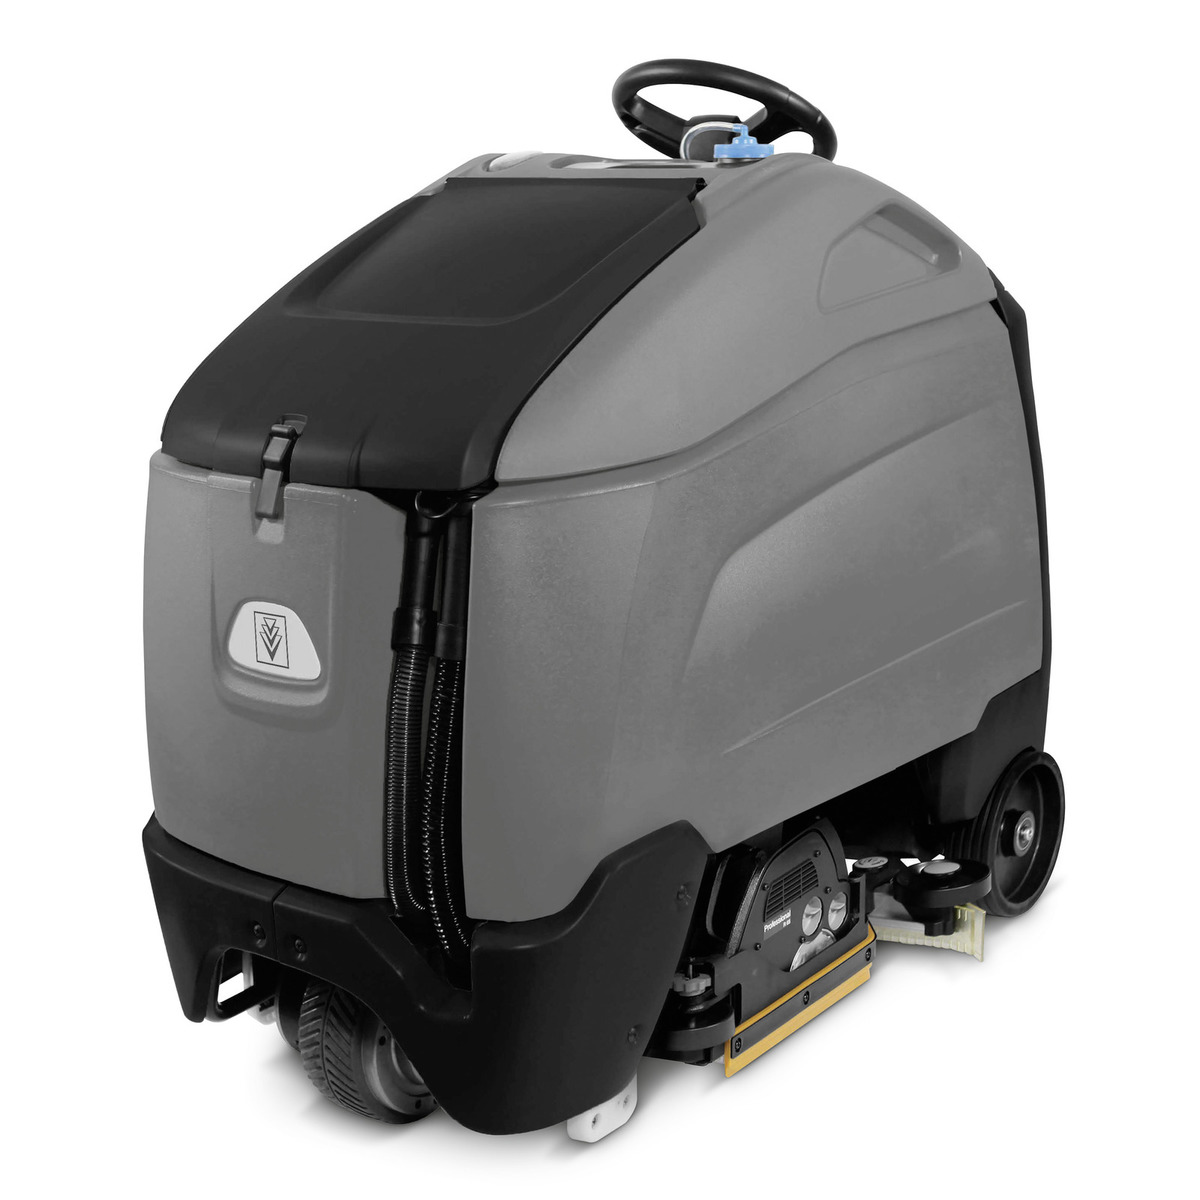 Windsor Chariot 3 iScrub 26 SP windsor, karcher, chariot, 3, iscrub, 26, sp, floor, commercial, auto-scrubber, scrubber, cleaning, 